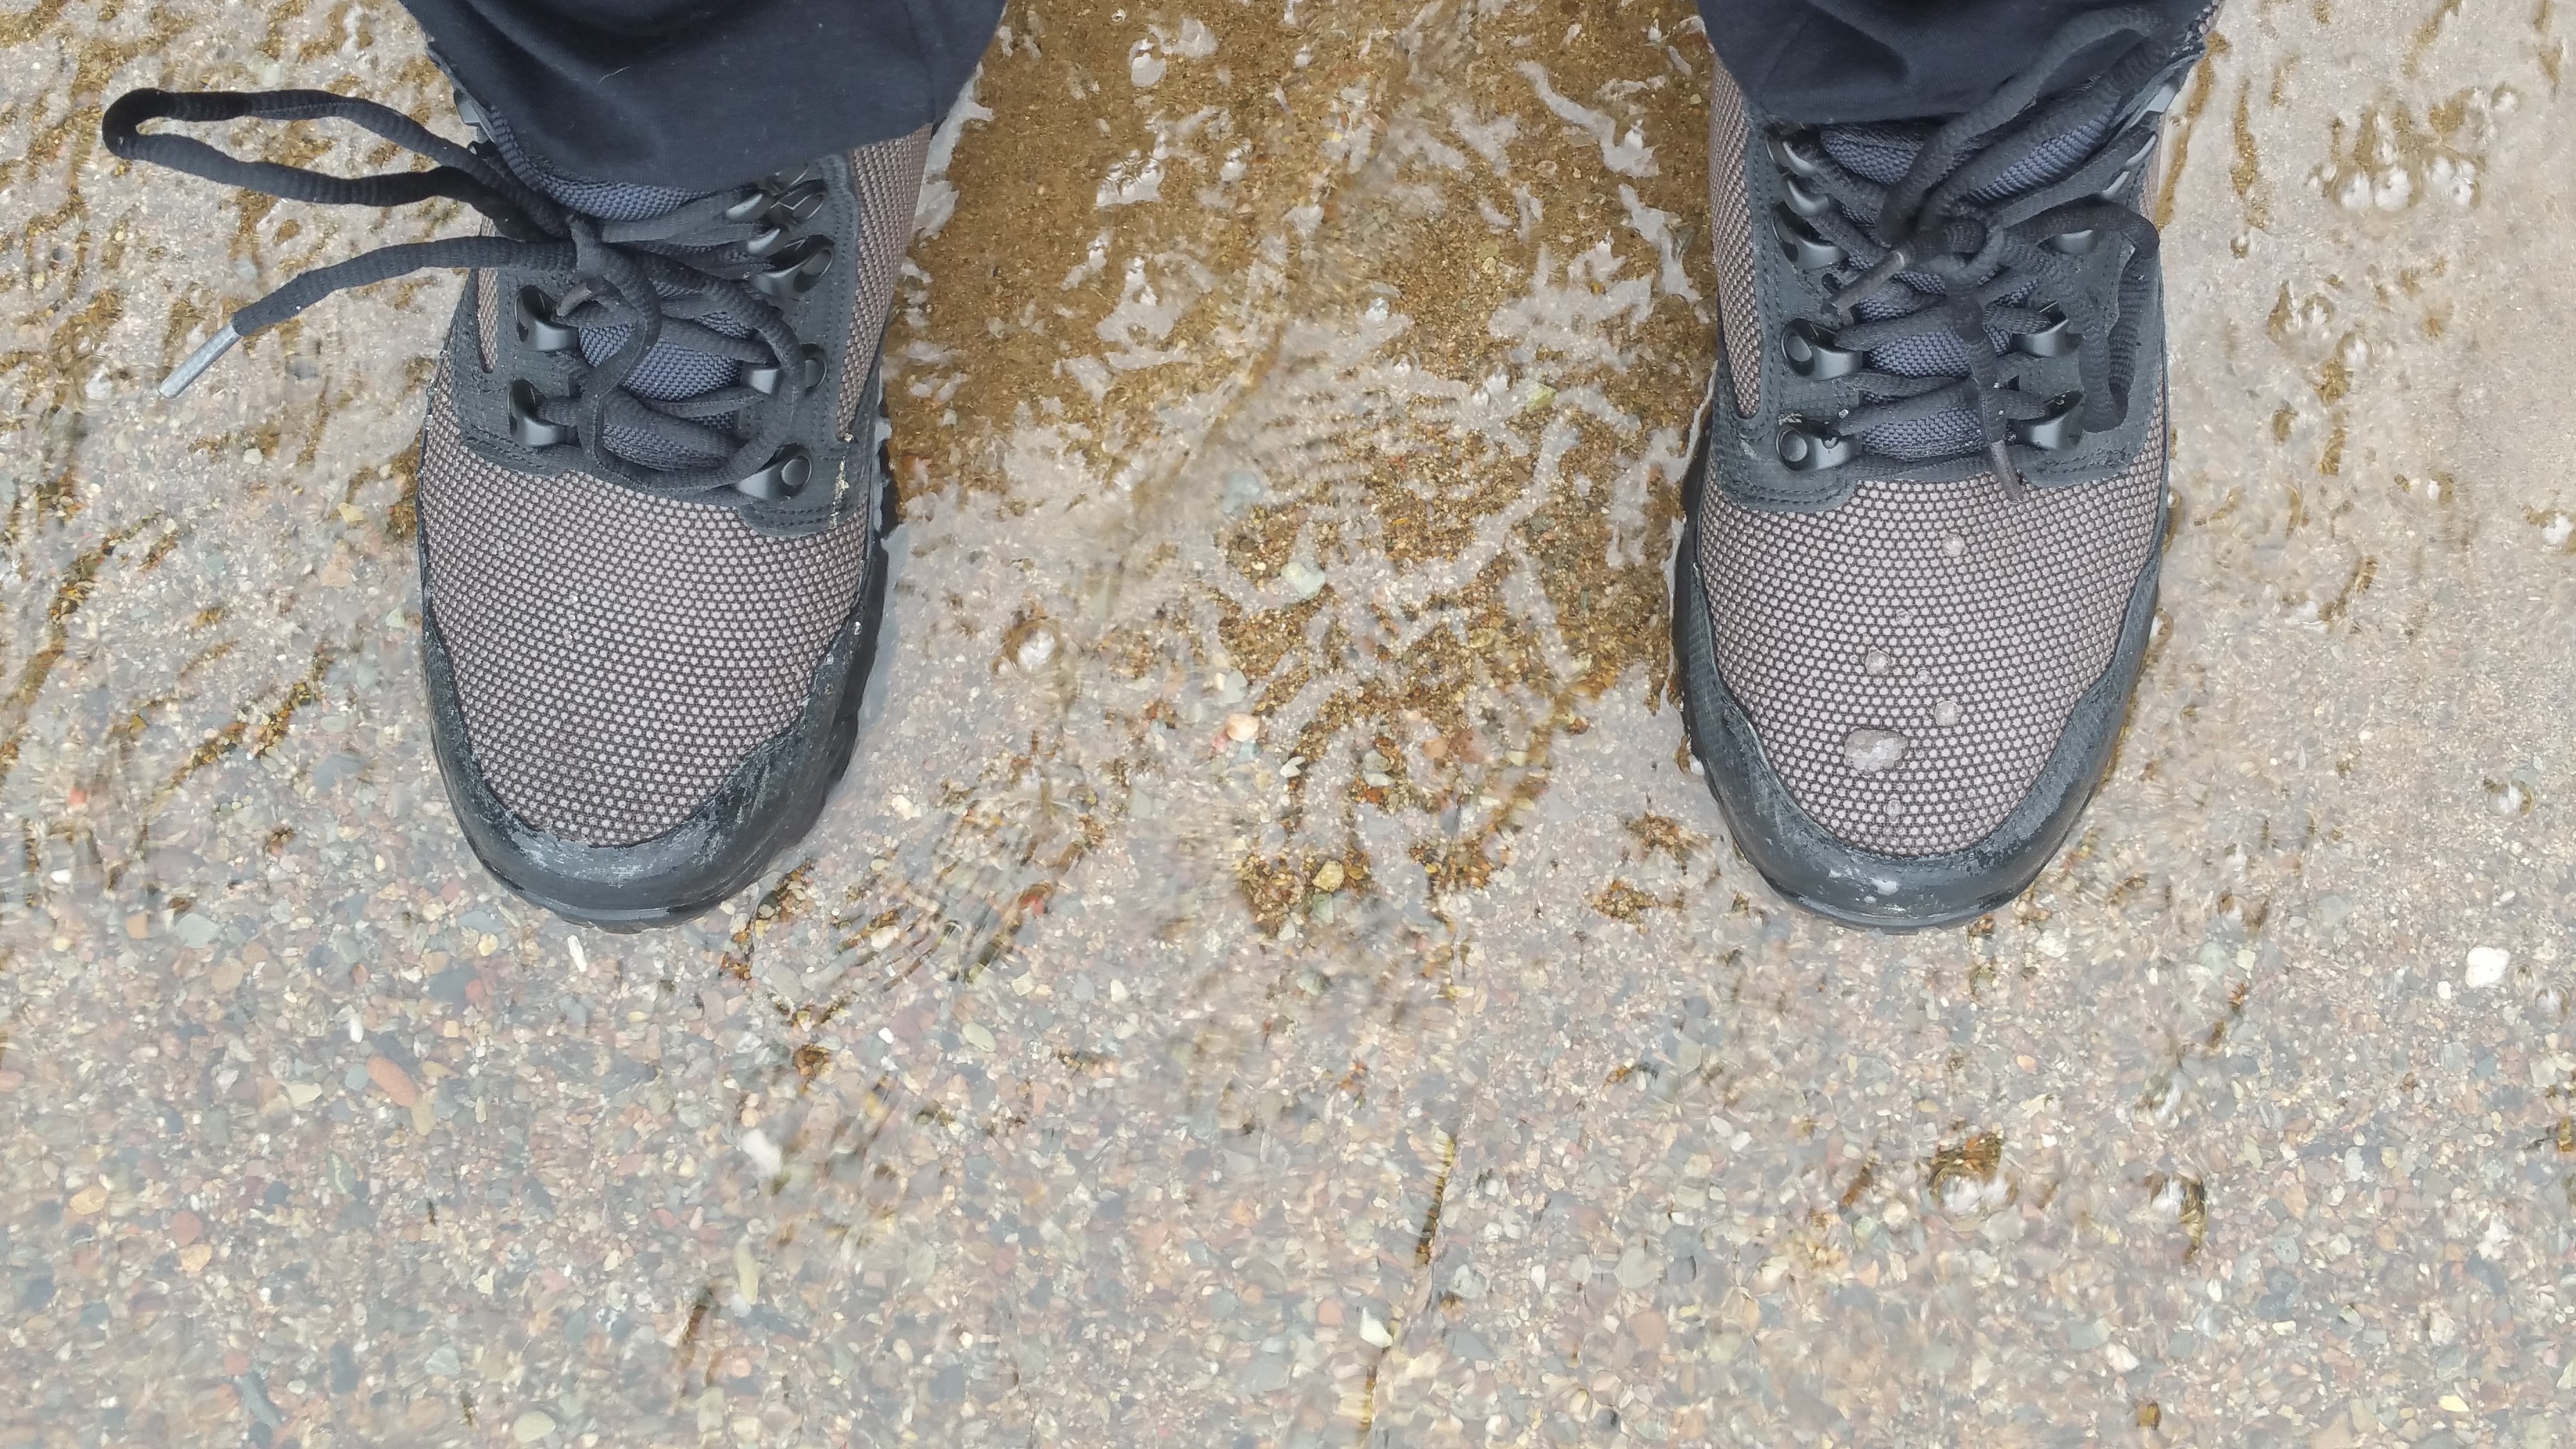 Water Resistant boots